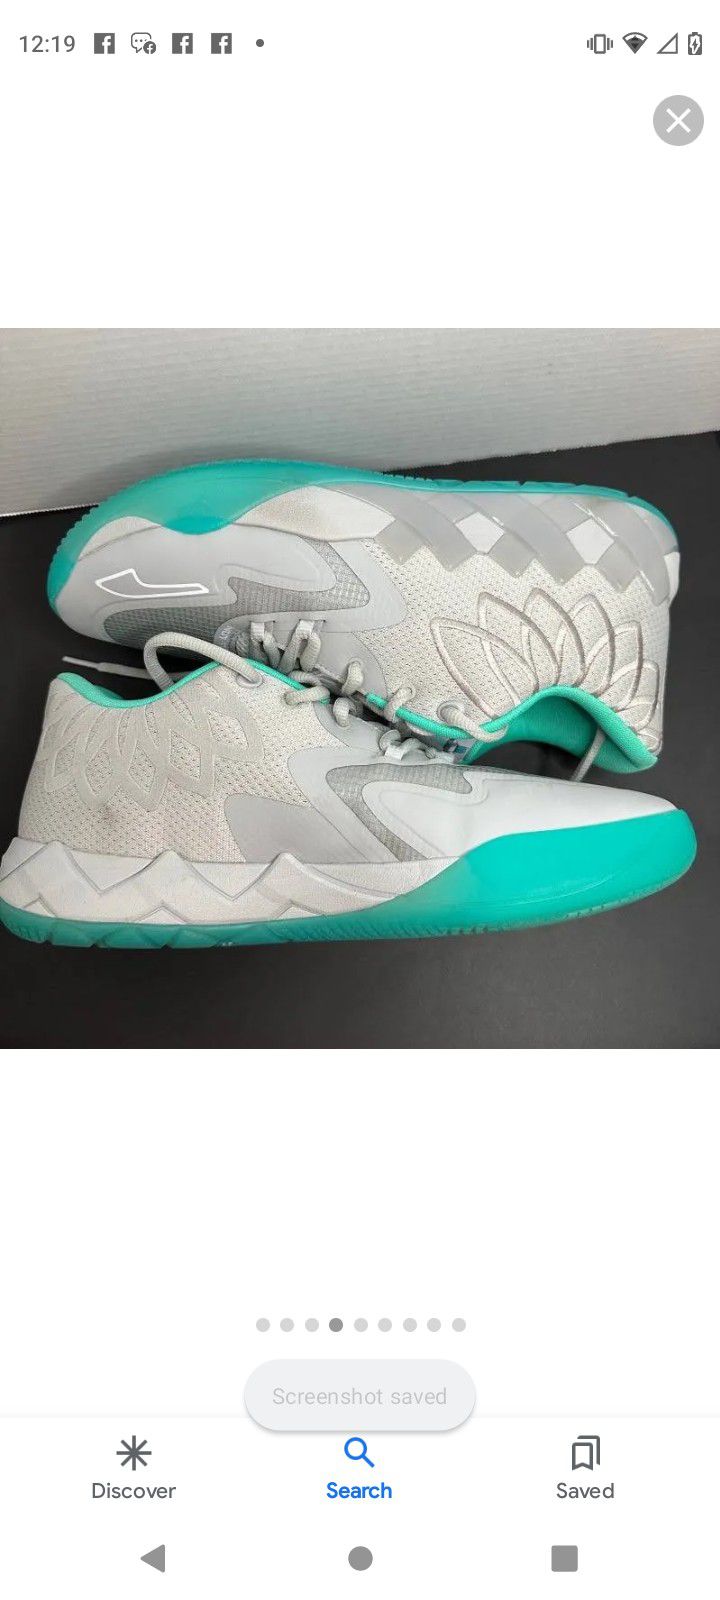 Exclusive Grey/Teal LaMelo Ball Puma Made Shoes!!!